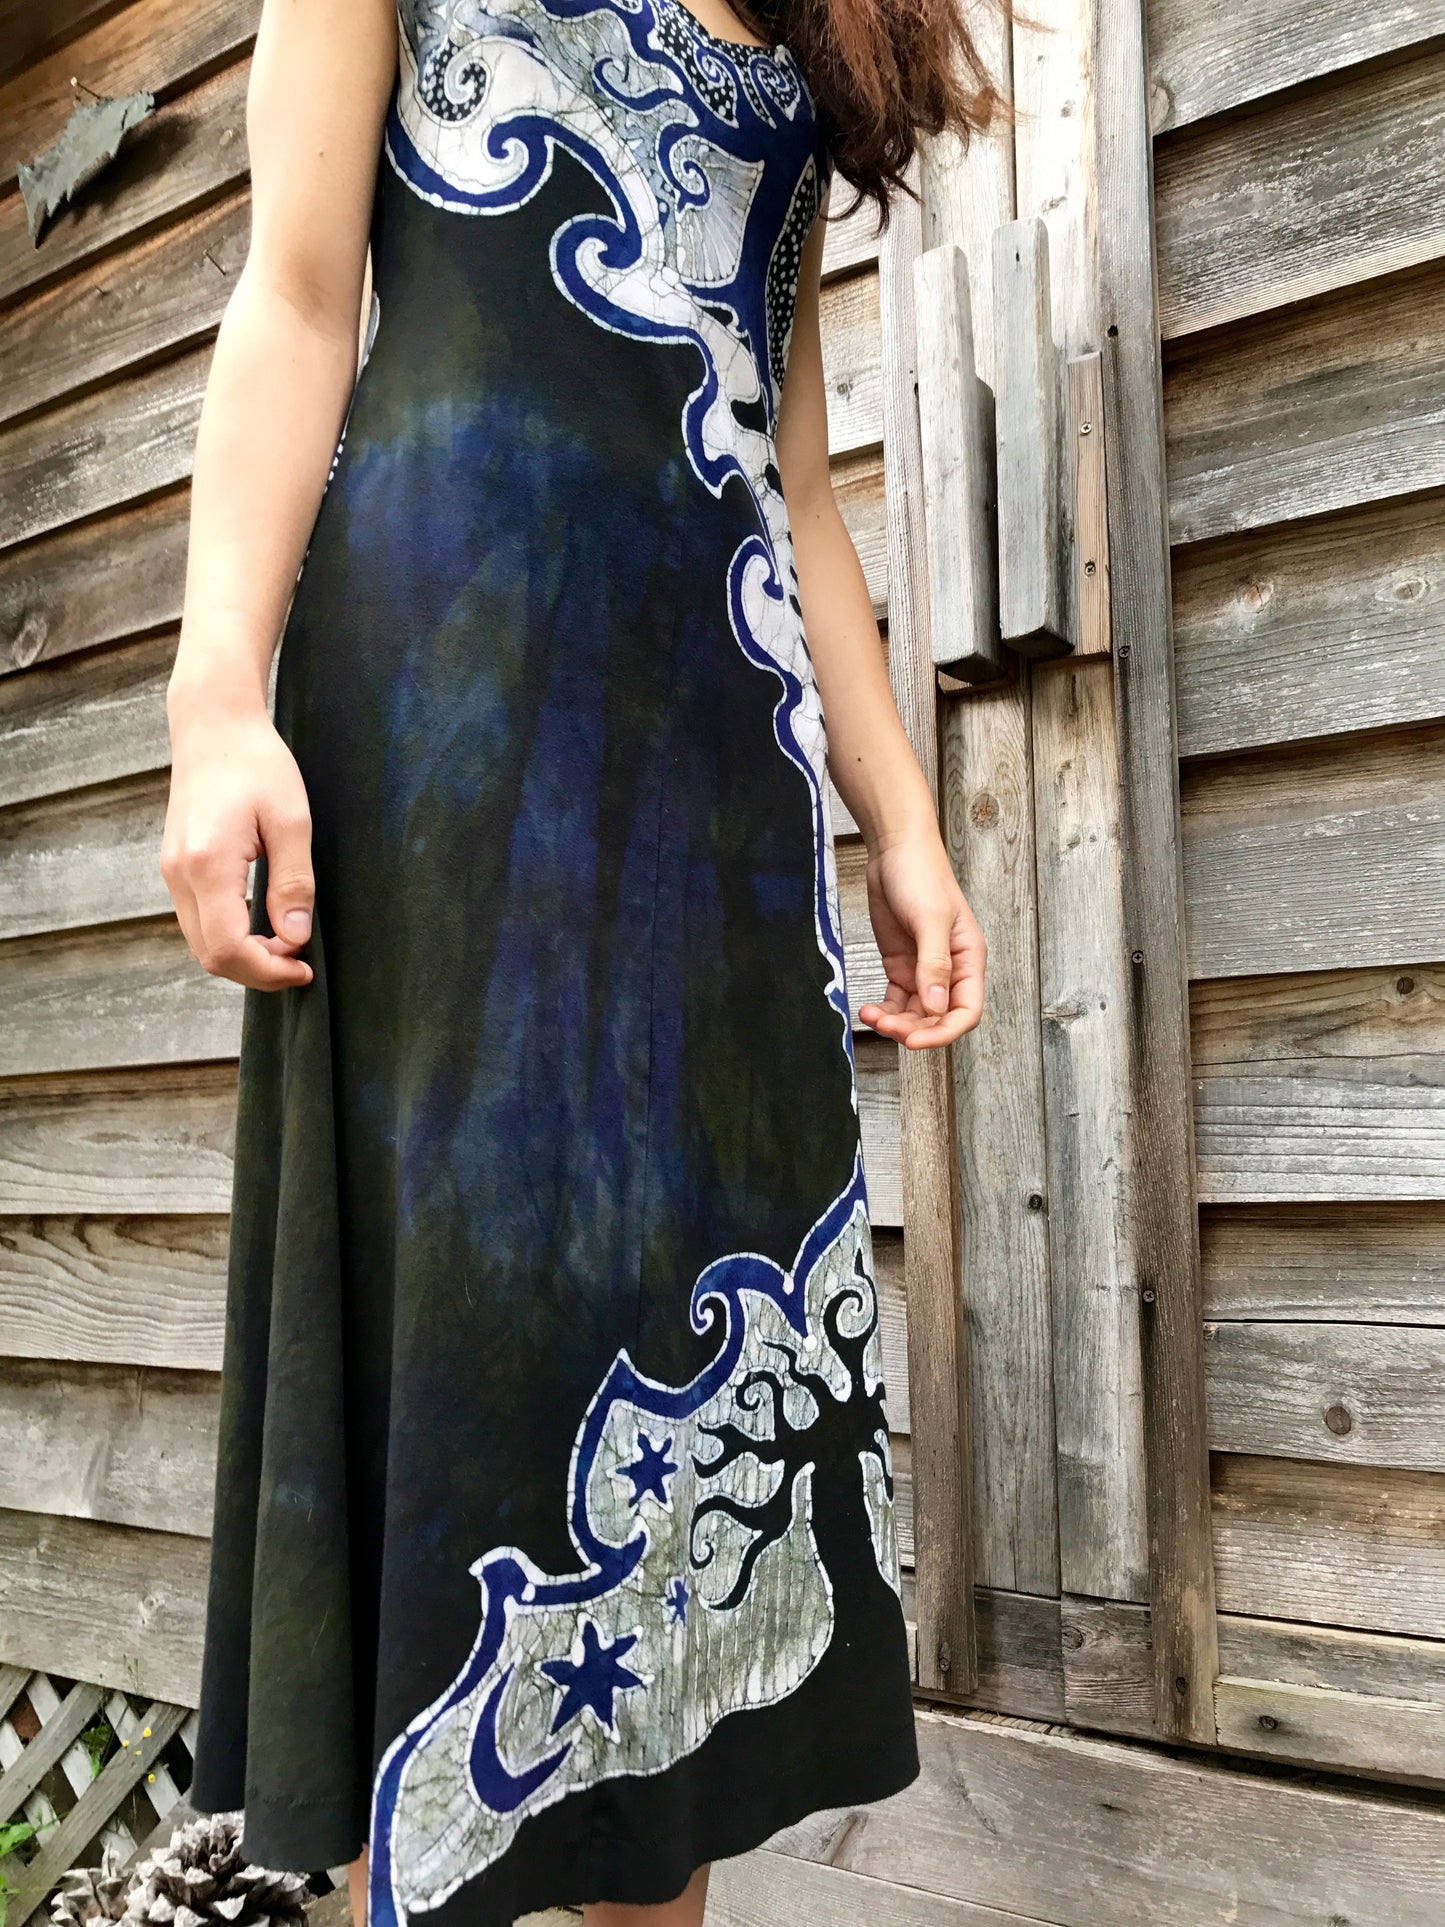 The Forest Begins Where The Halfmoon Ends Batikwalla Dress in Organic Cotton - Size Medium